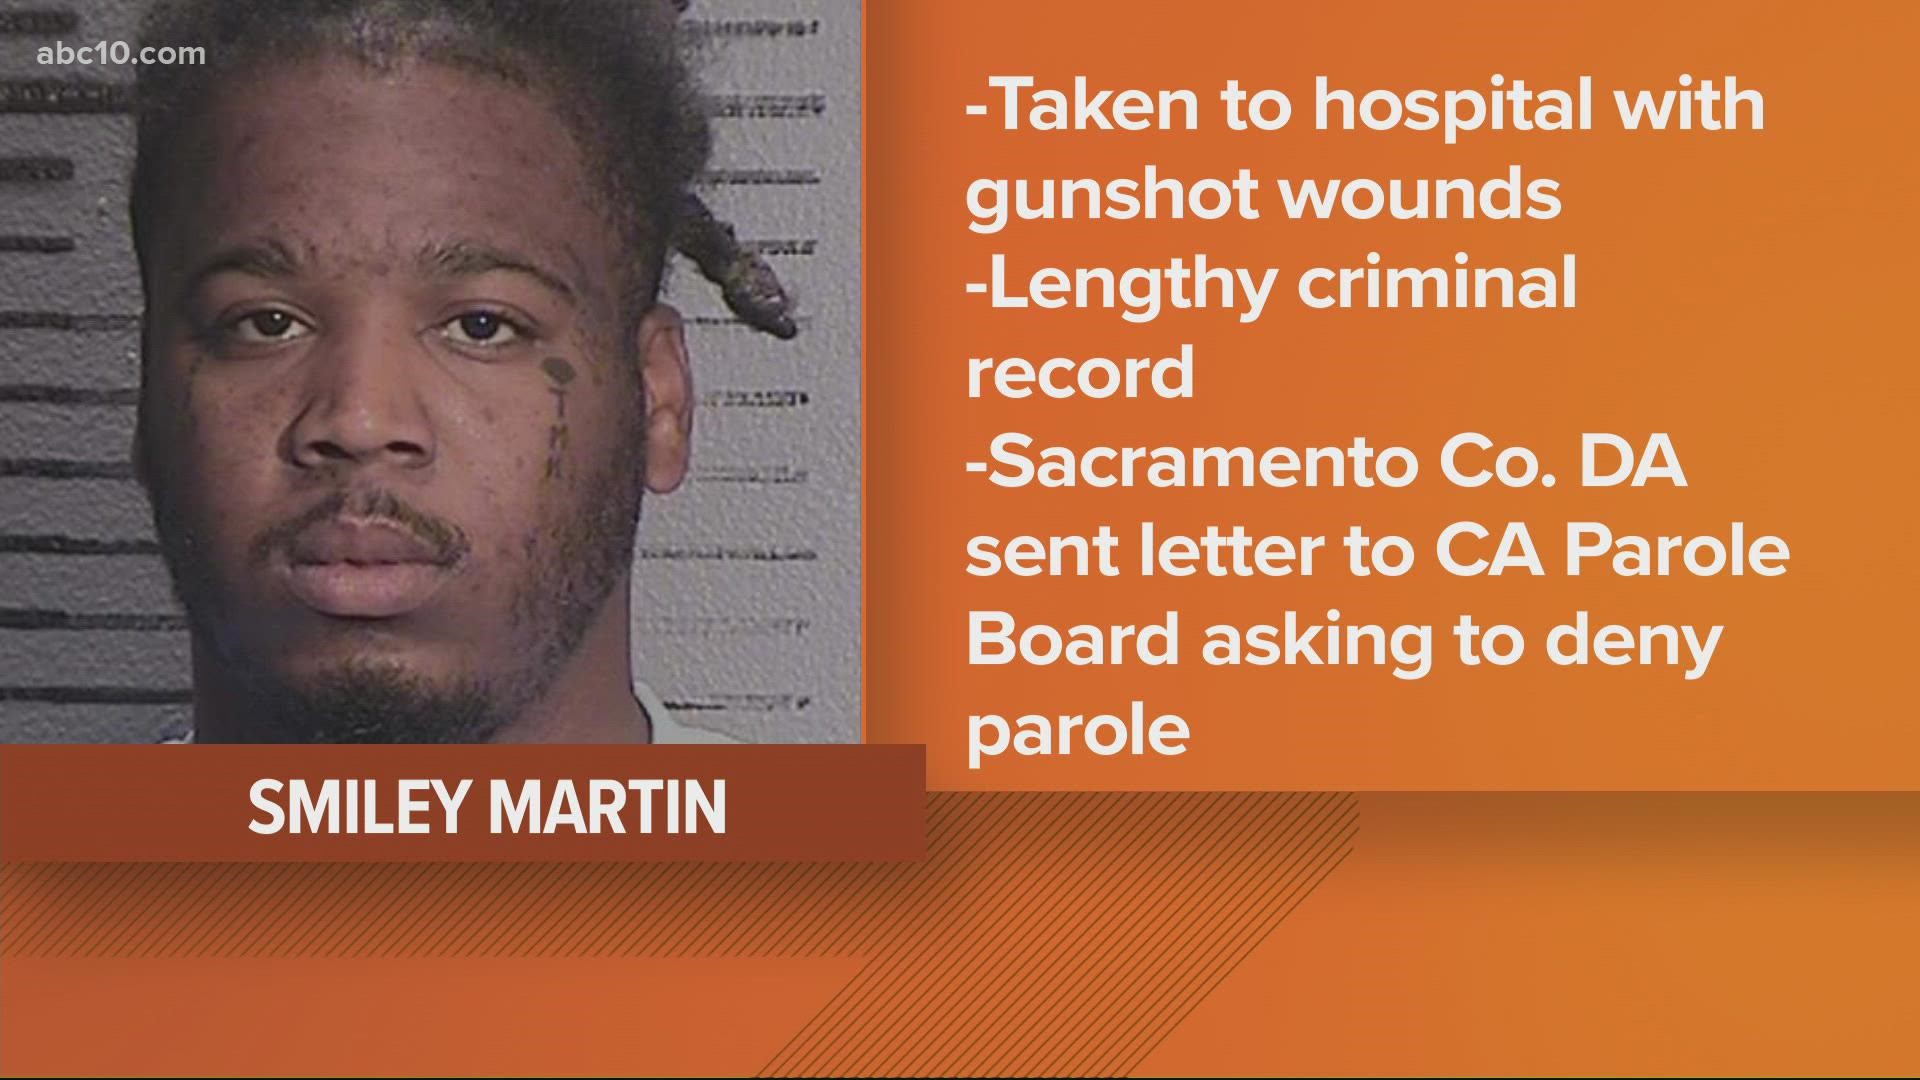 After the mass casualty shooting on Sunday morning, one suspect police allege was involved is Smiley Martin. His criminal record has since surfaced.